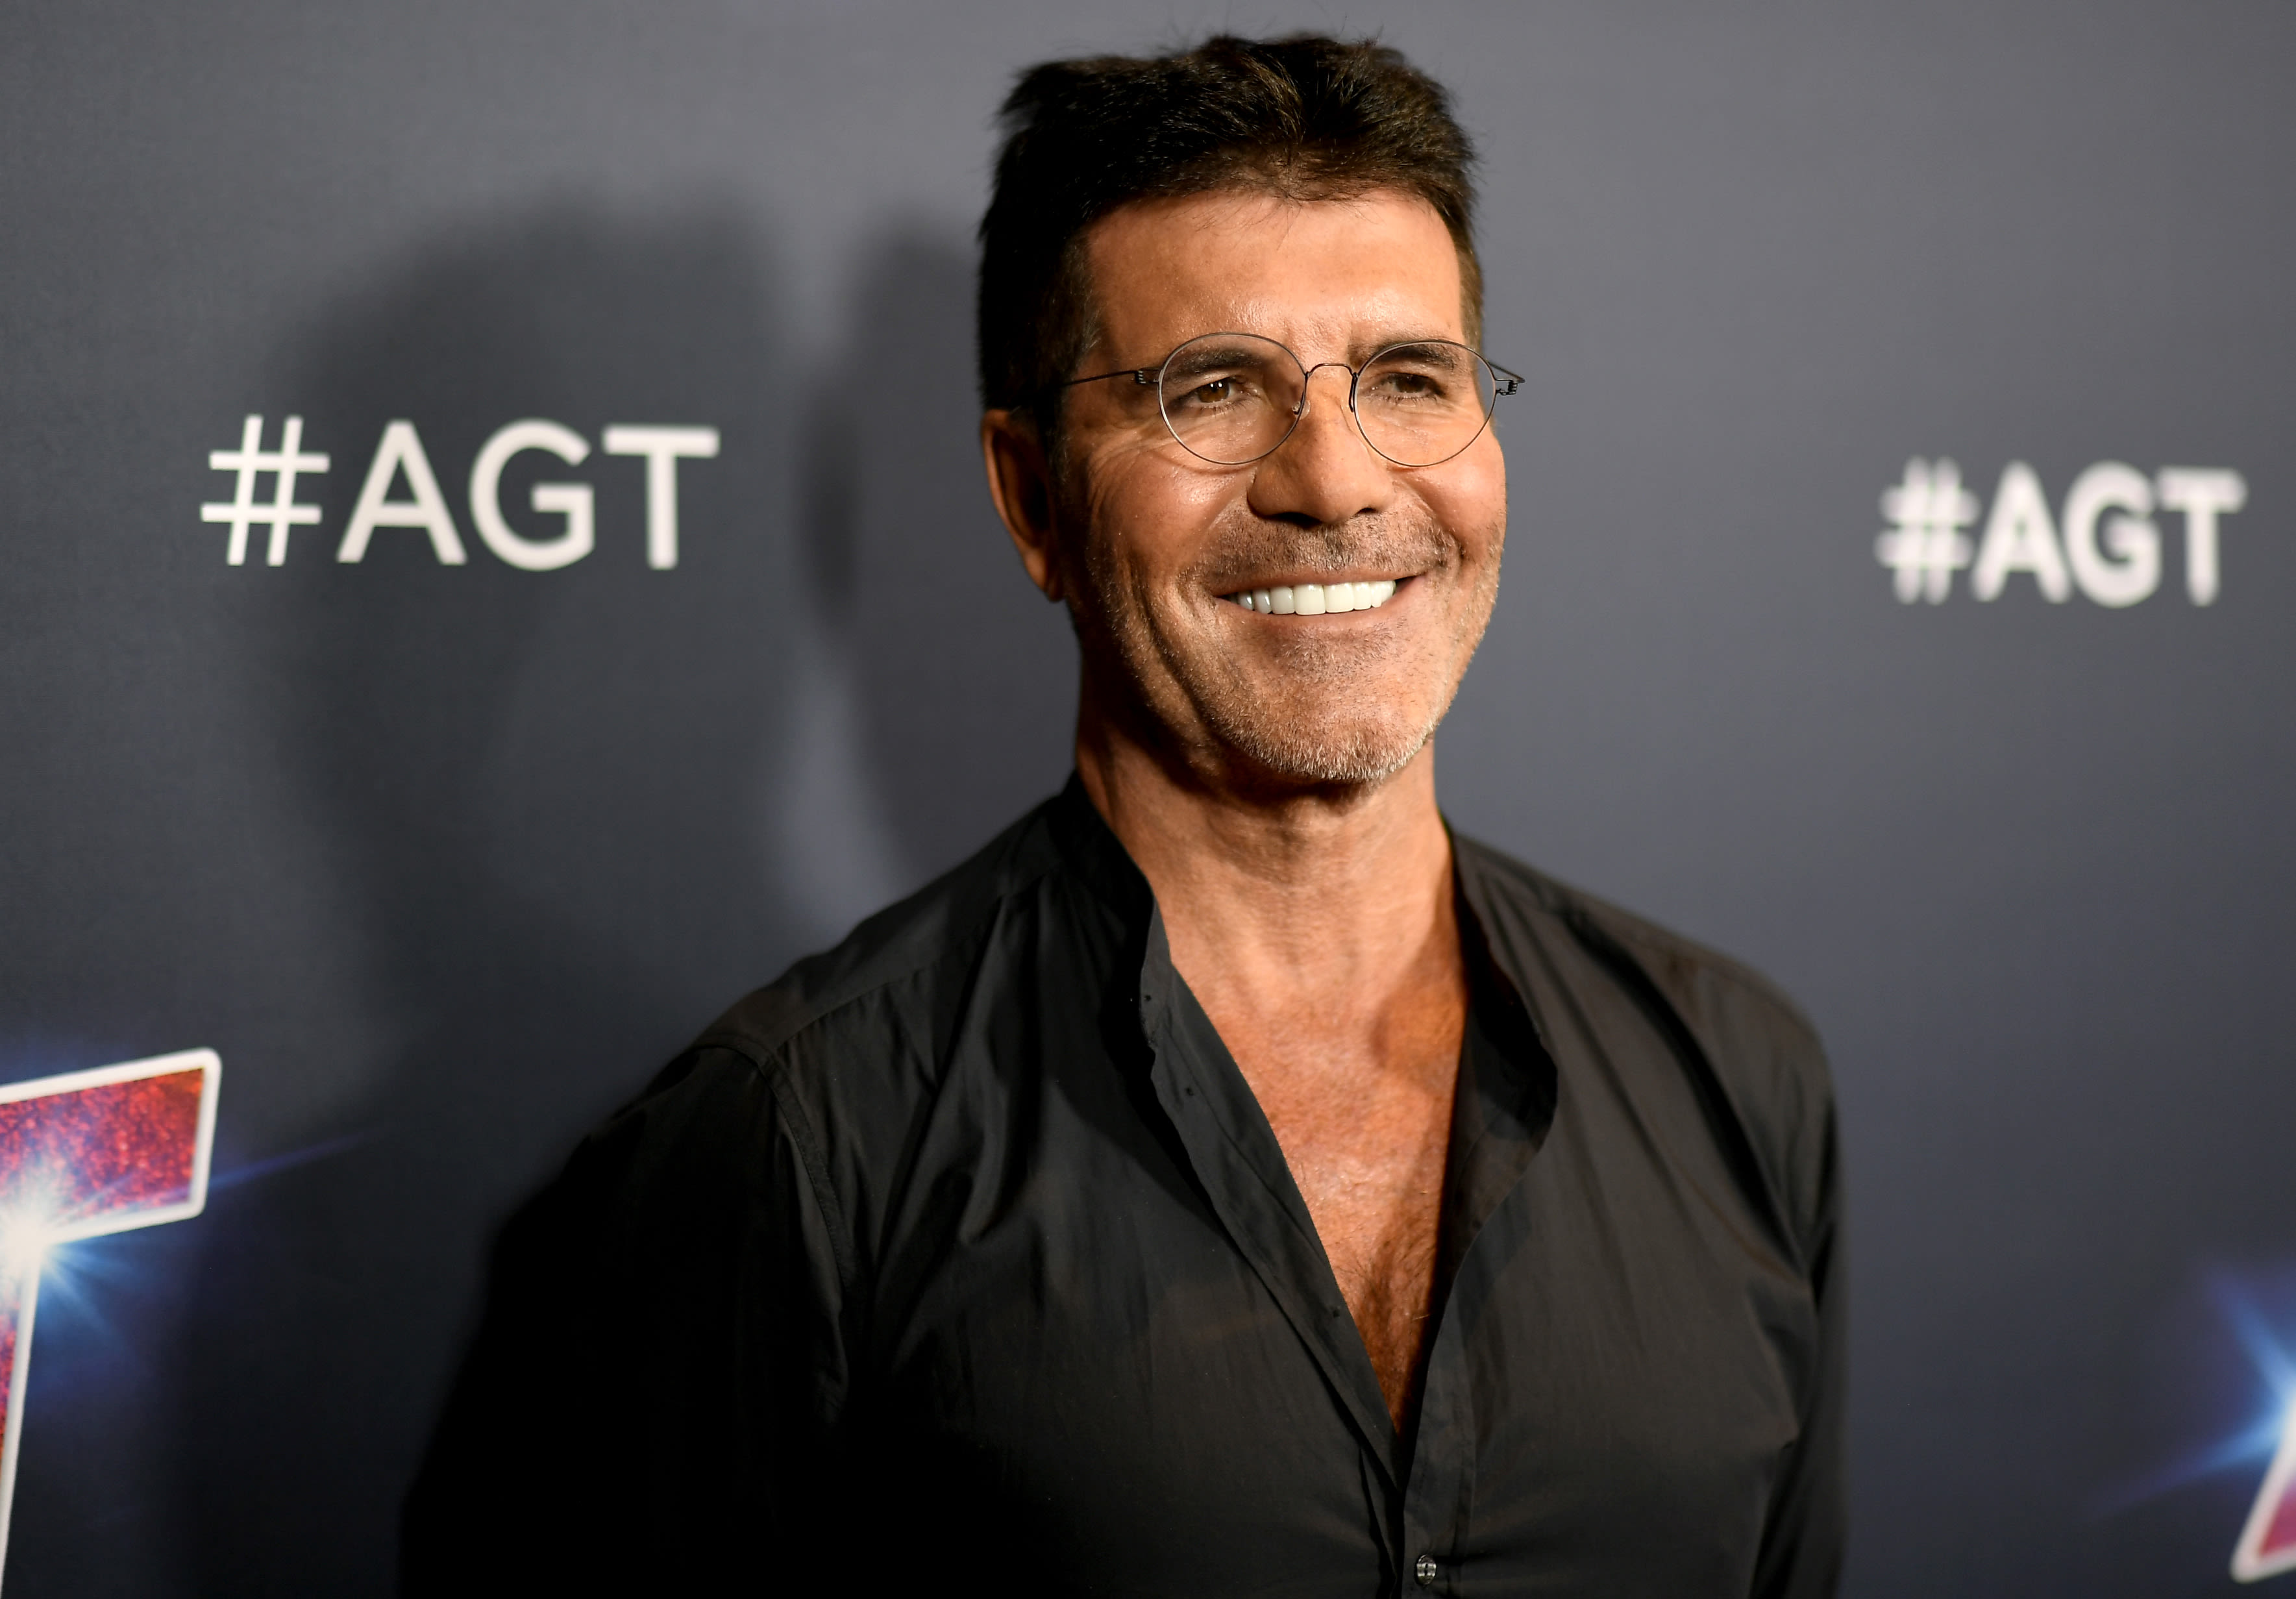 Simon Cowell sparks criticism for "out of touch" claim